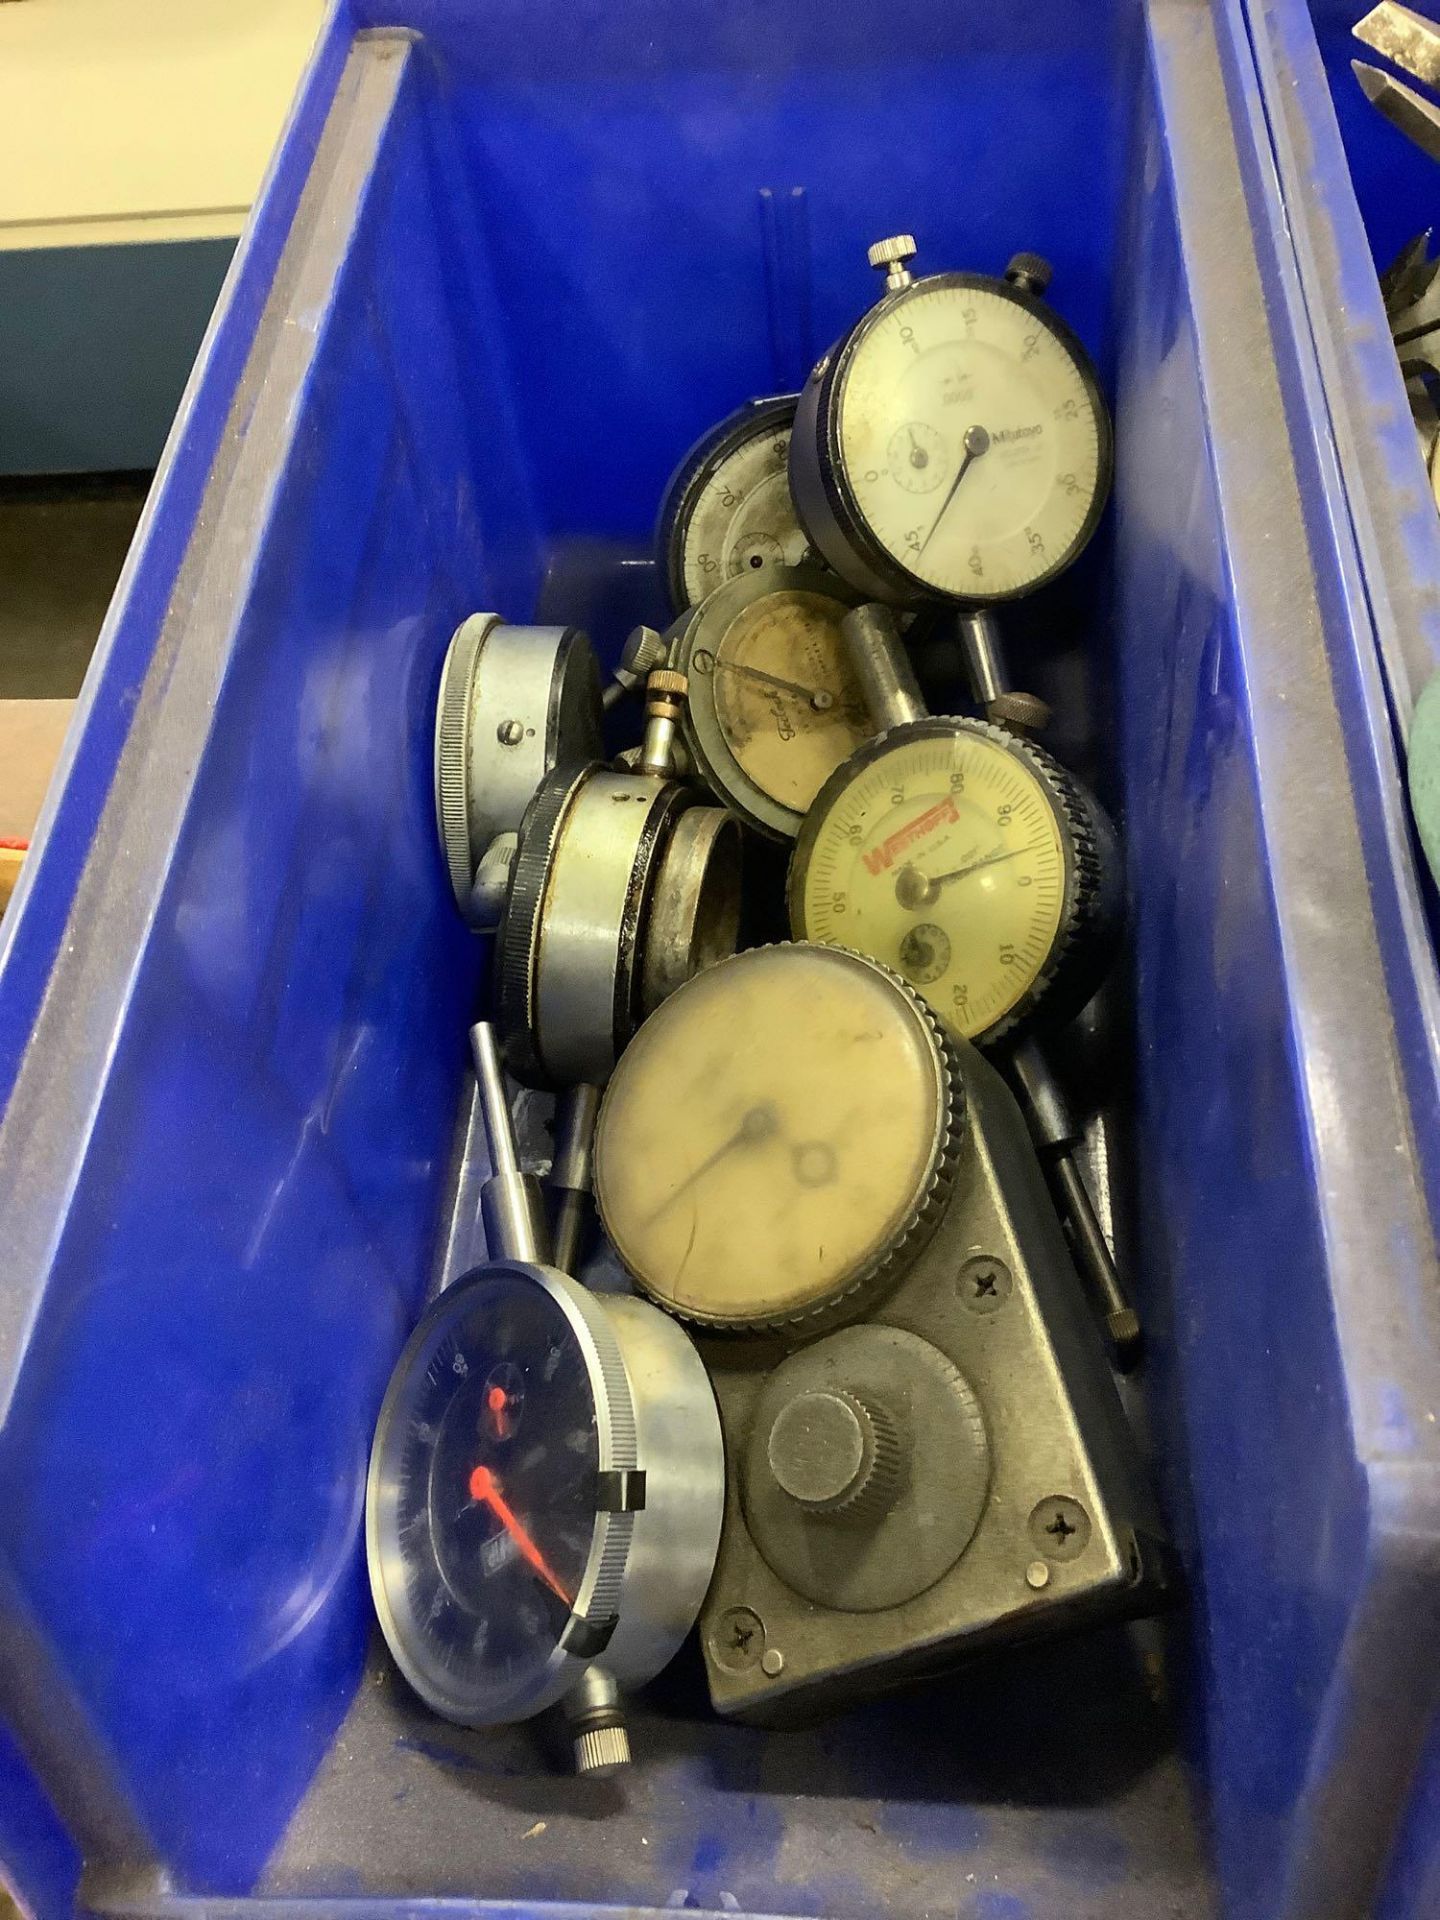 Lot: Calipers, Micrometers, Gauges; assorted sizes - Image 2 of 3